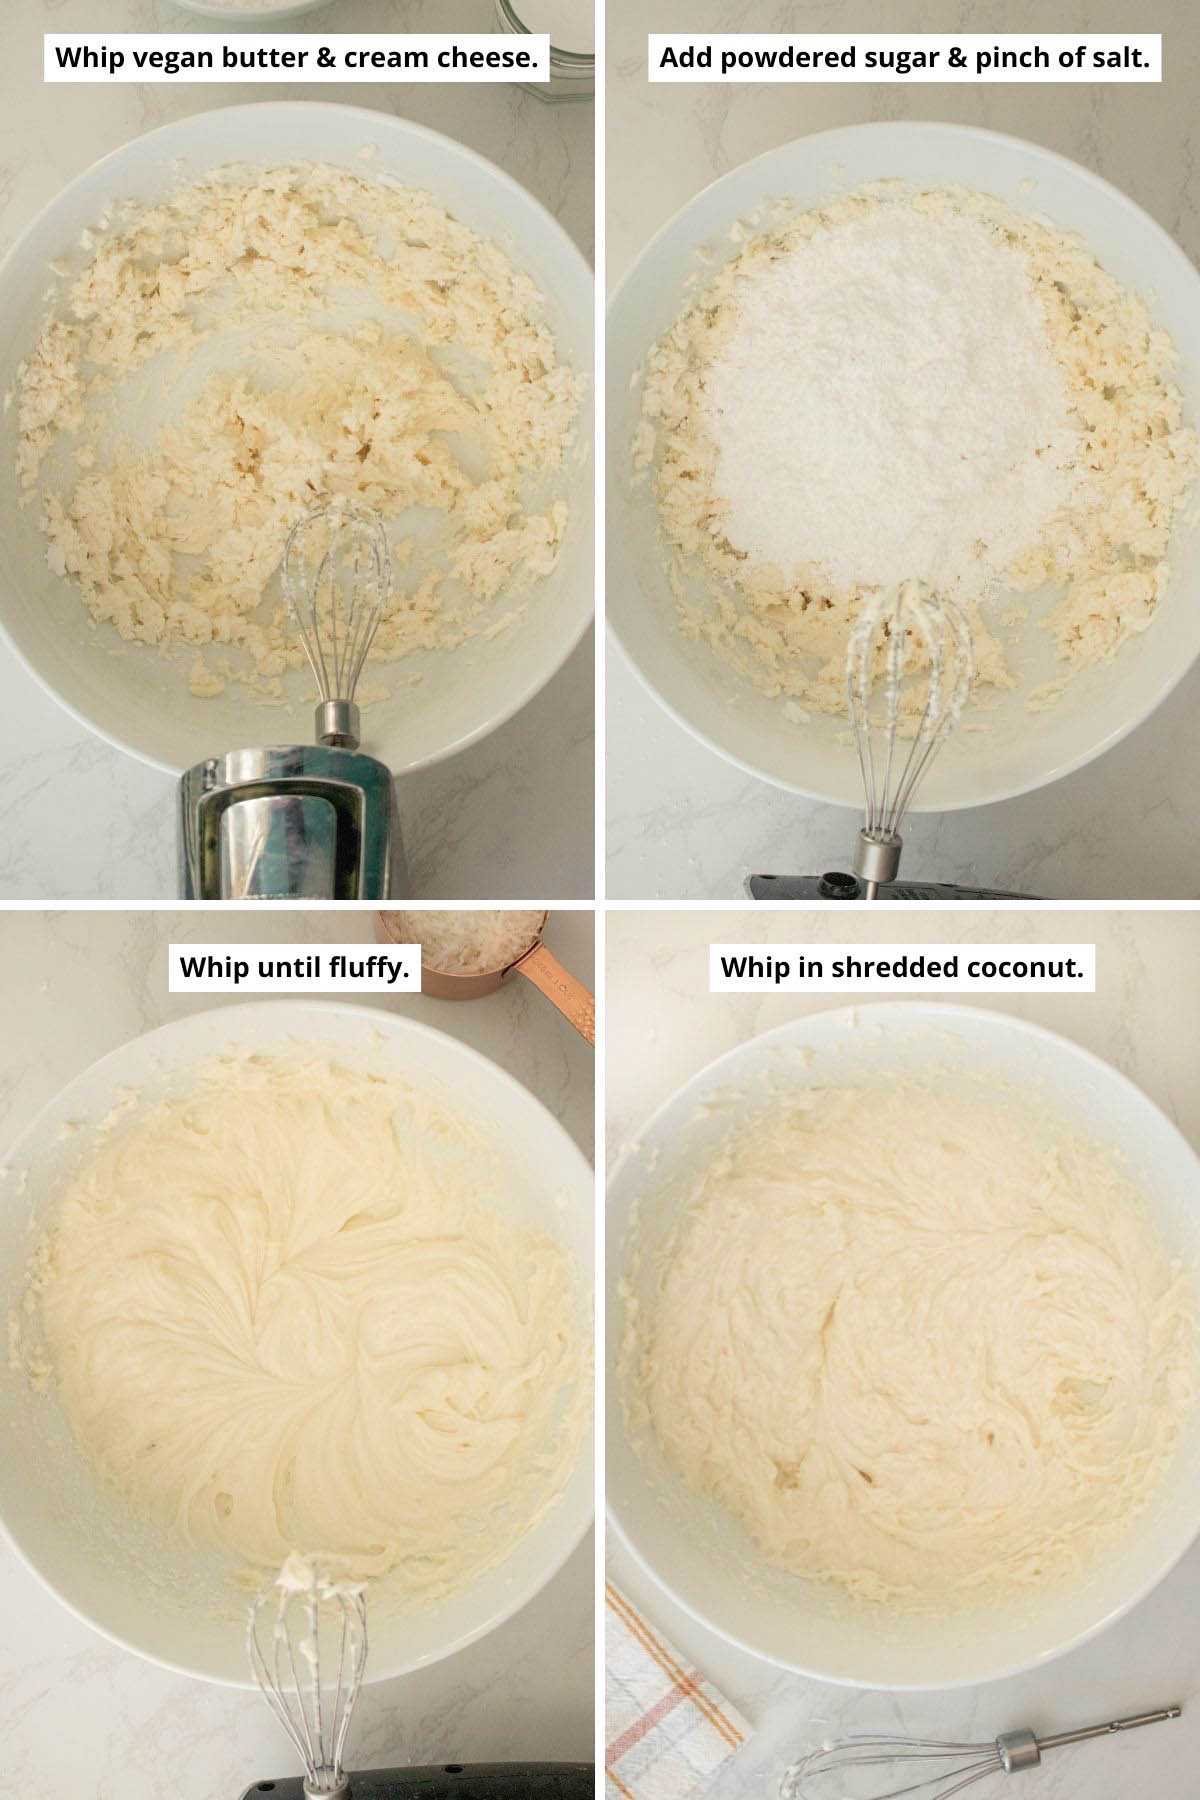 image collage showing the creamed butter and cream cheese, adding the powdered sugar, the whipped frosting before and after mixing in the coconut